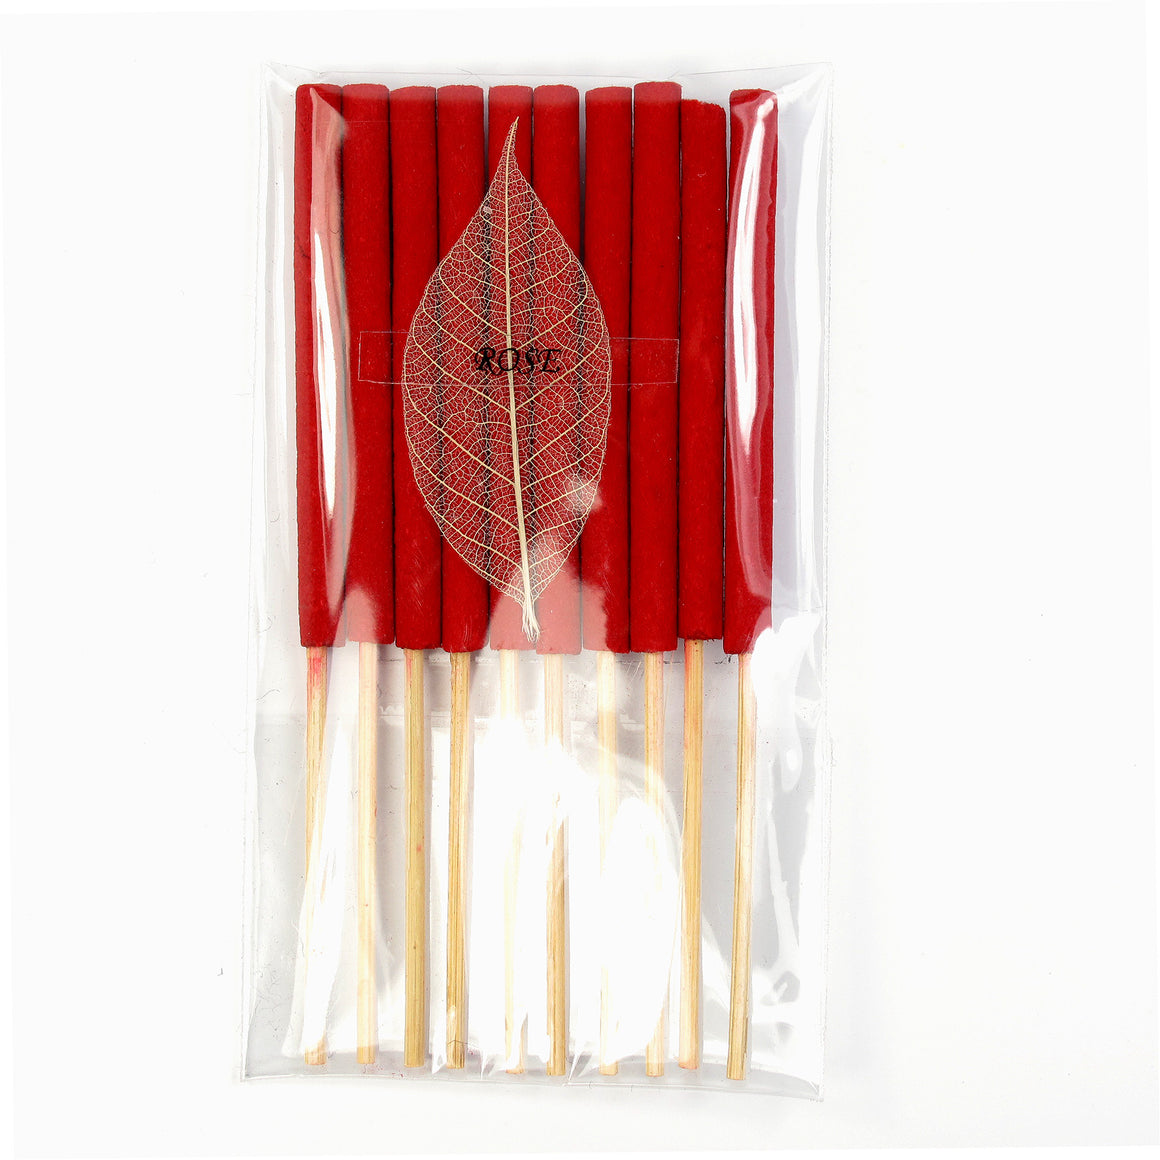 Candle & Incense Gift Set, Red - TropicaZona